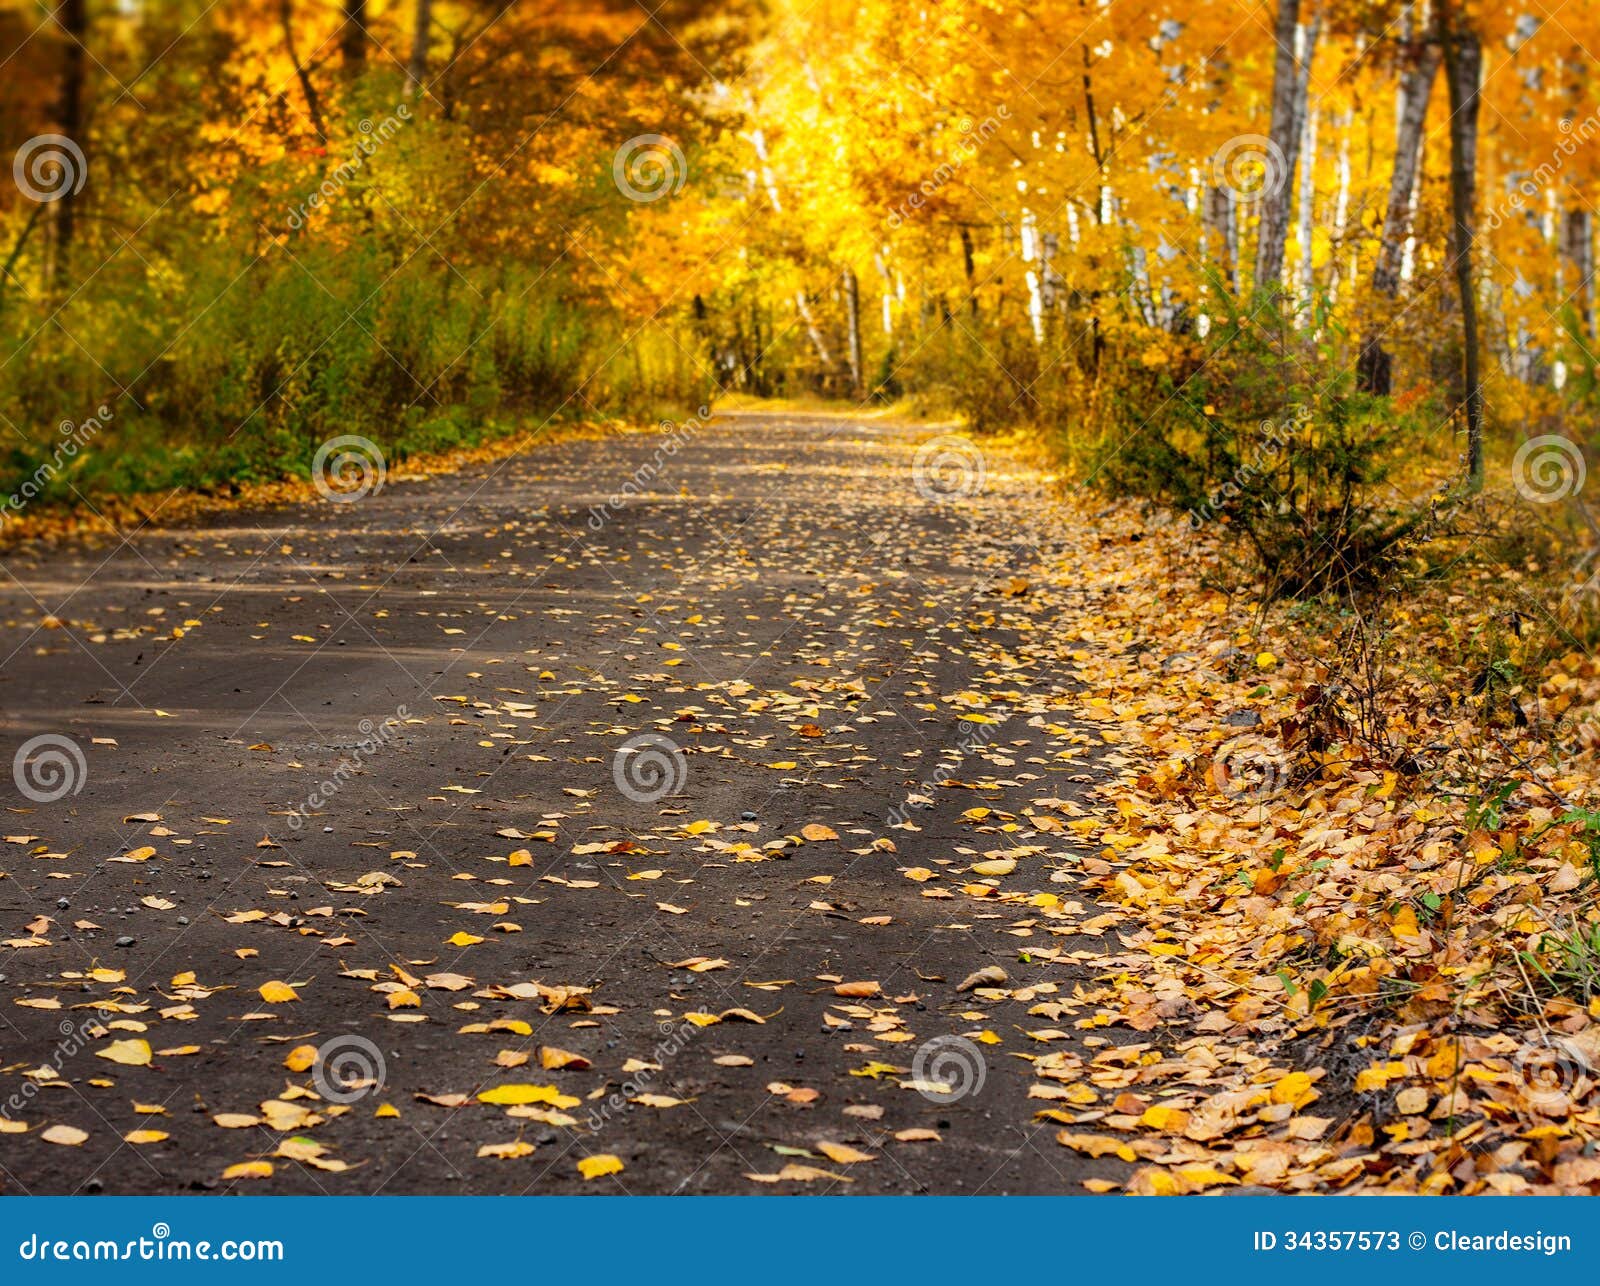 Autumn Forest Road With Gold Leaves Landscape Stock Image Image Of